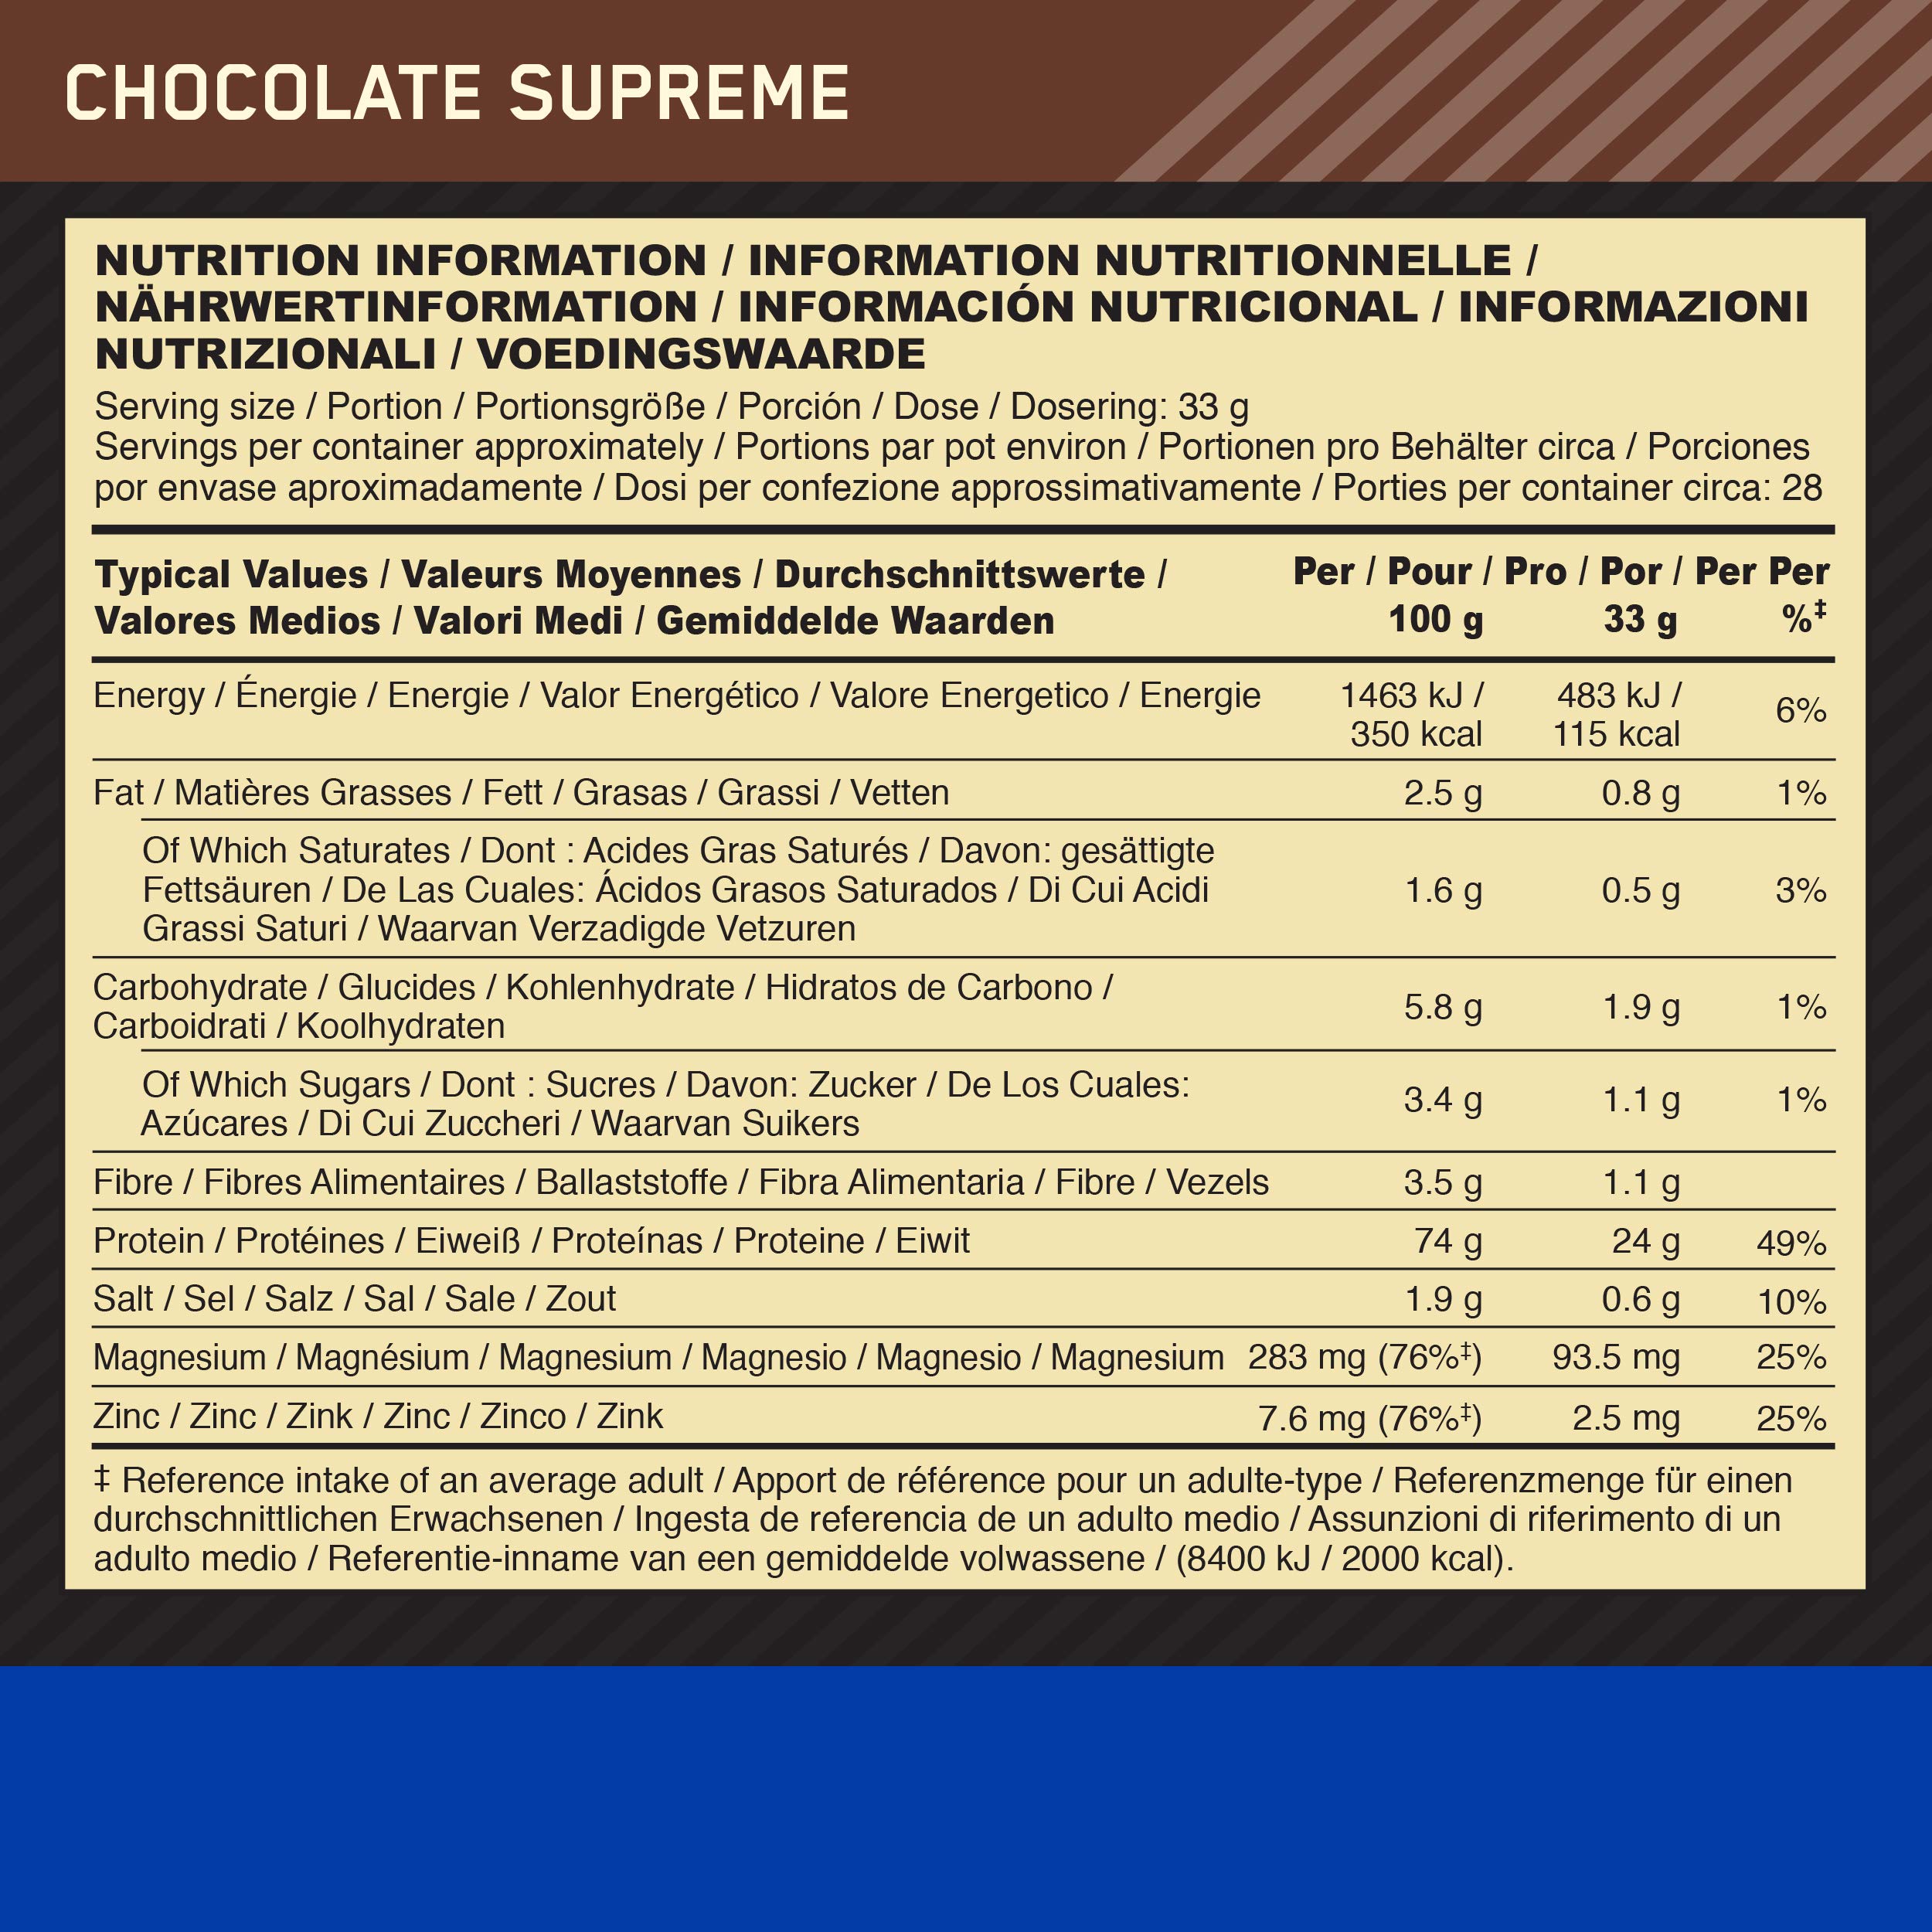 Optimum Nutrition Gold Standard 100% Micellar Casein Protein Powder, Slow Digesting, Helps Keep You Full, Overnight Muscle Recovery, Chocolate Supreme, 2 Pound (Packaging May Vary)